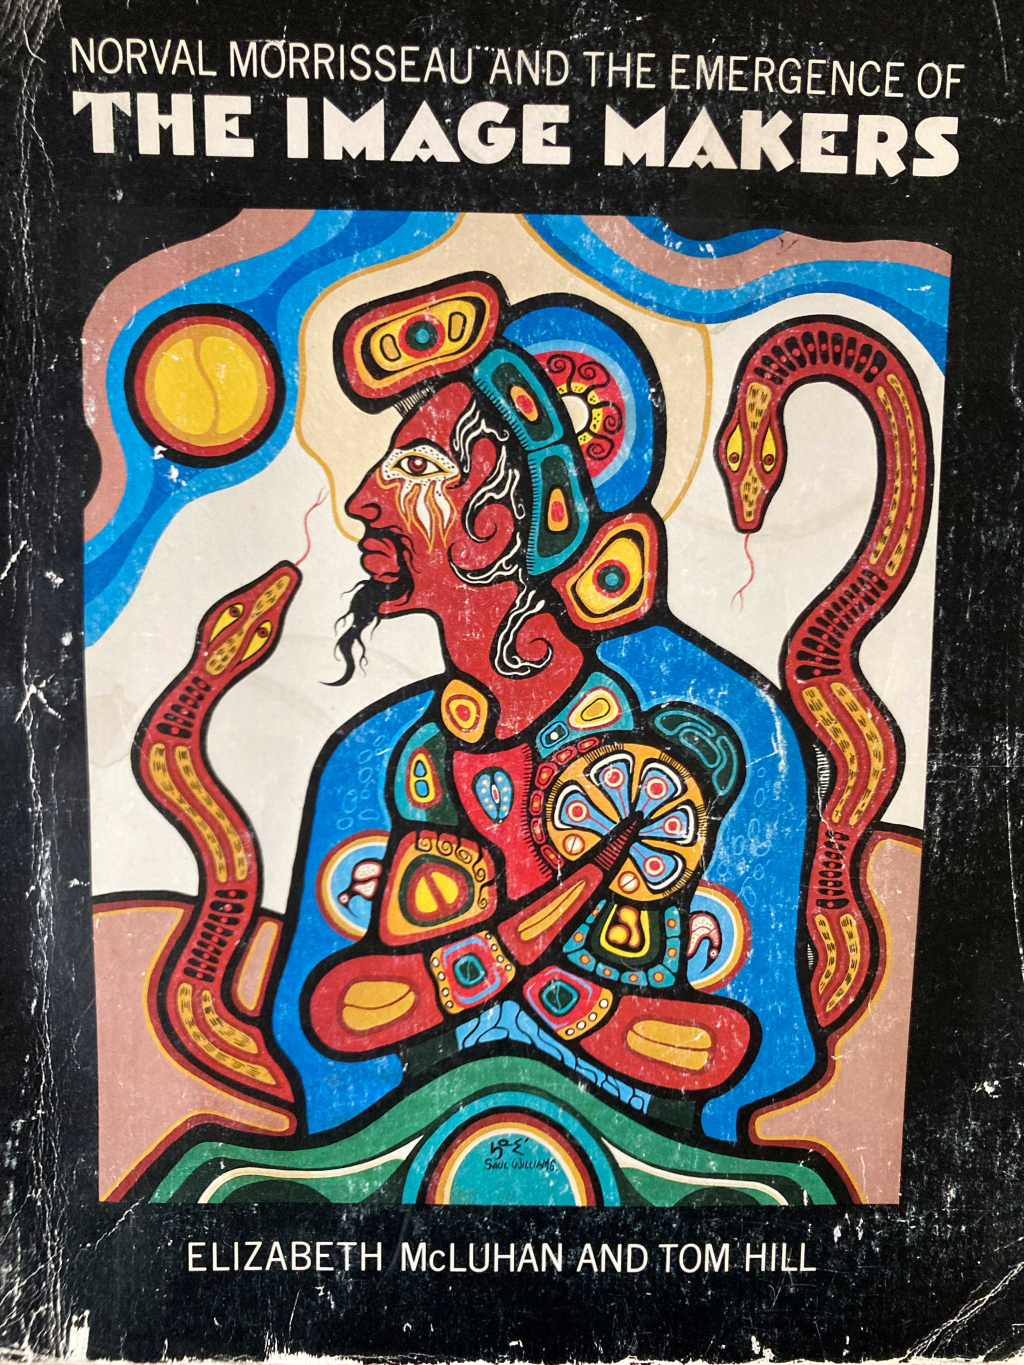 Painting by Saul Williams, which served as the cover of a catalogue